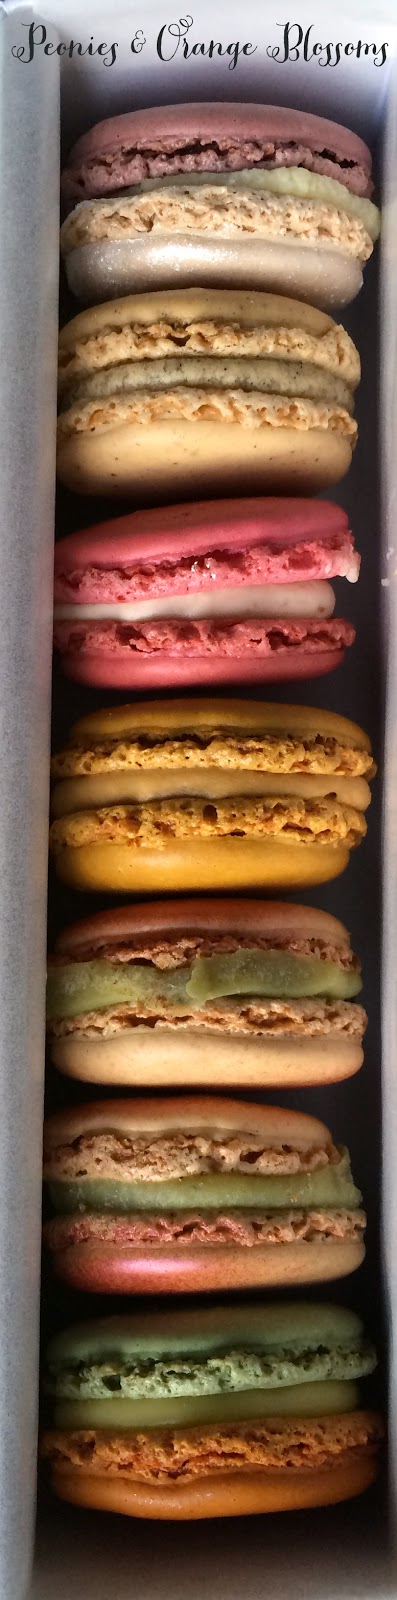 Which macarons are better? Lauder or Pierre Herme? Mystery is answered!